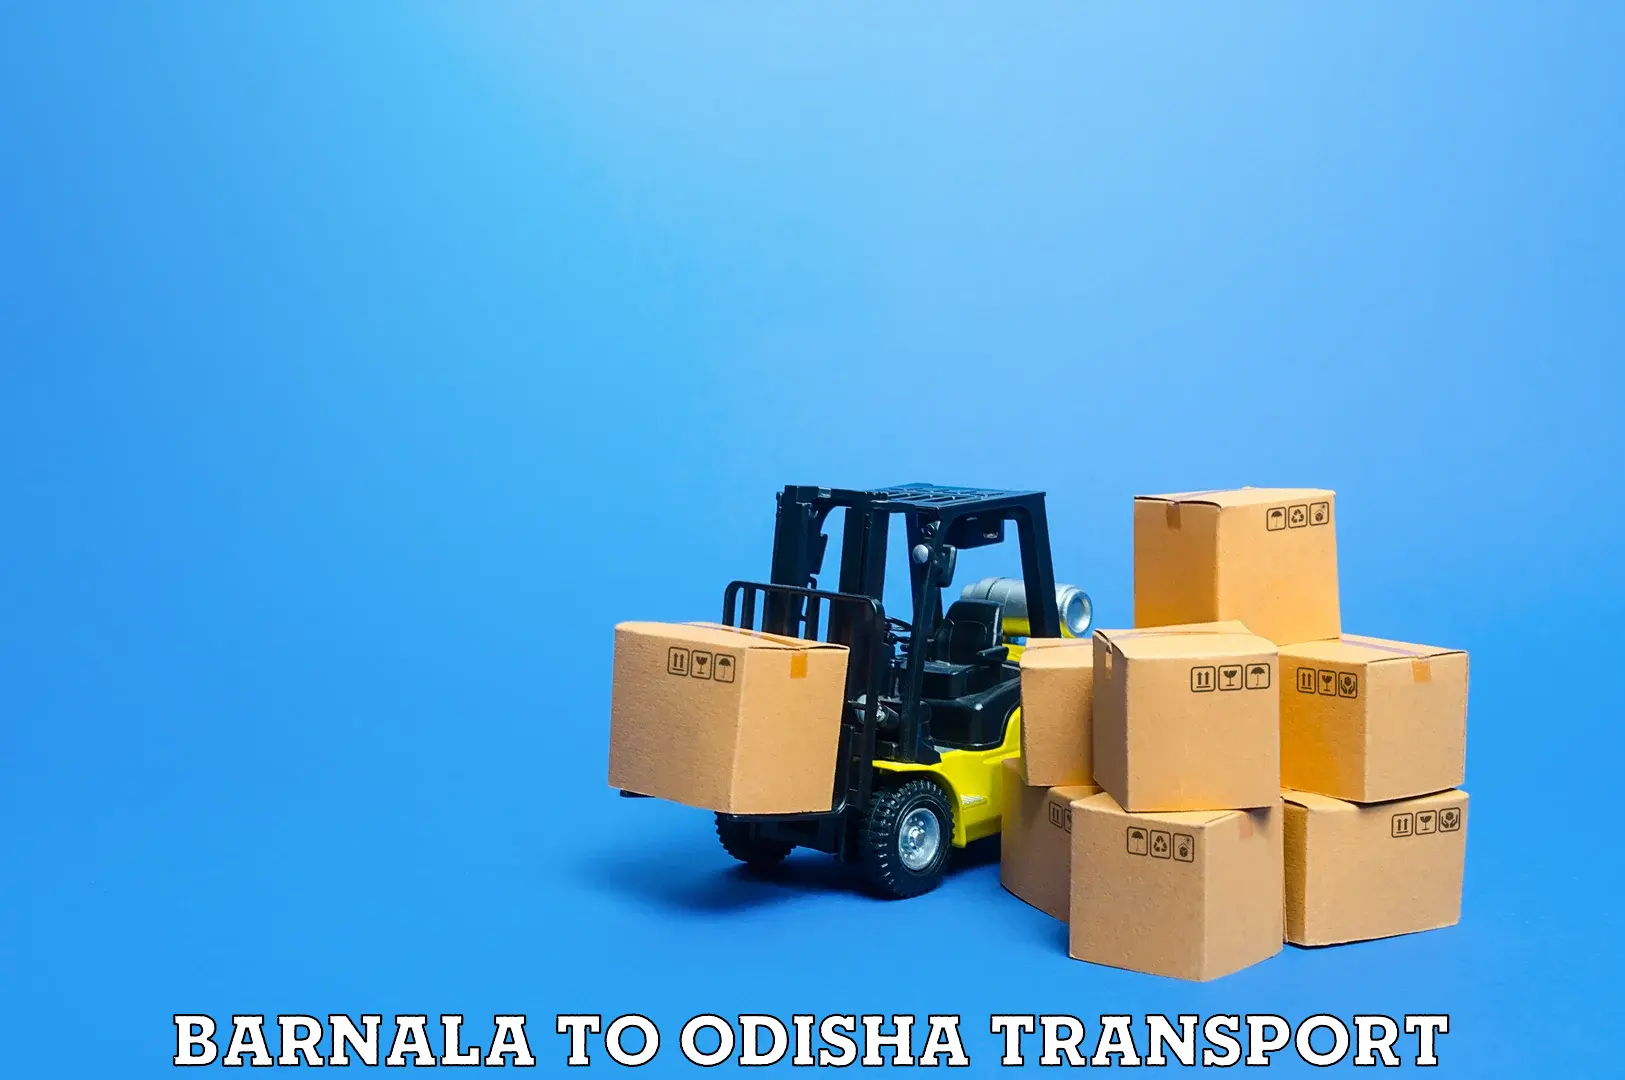 Container transport service Barnala to Bonth